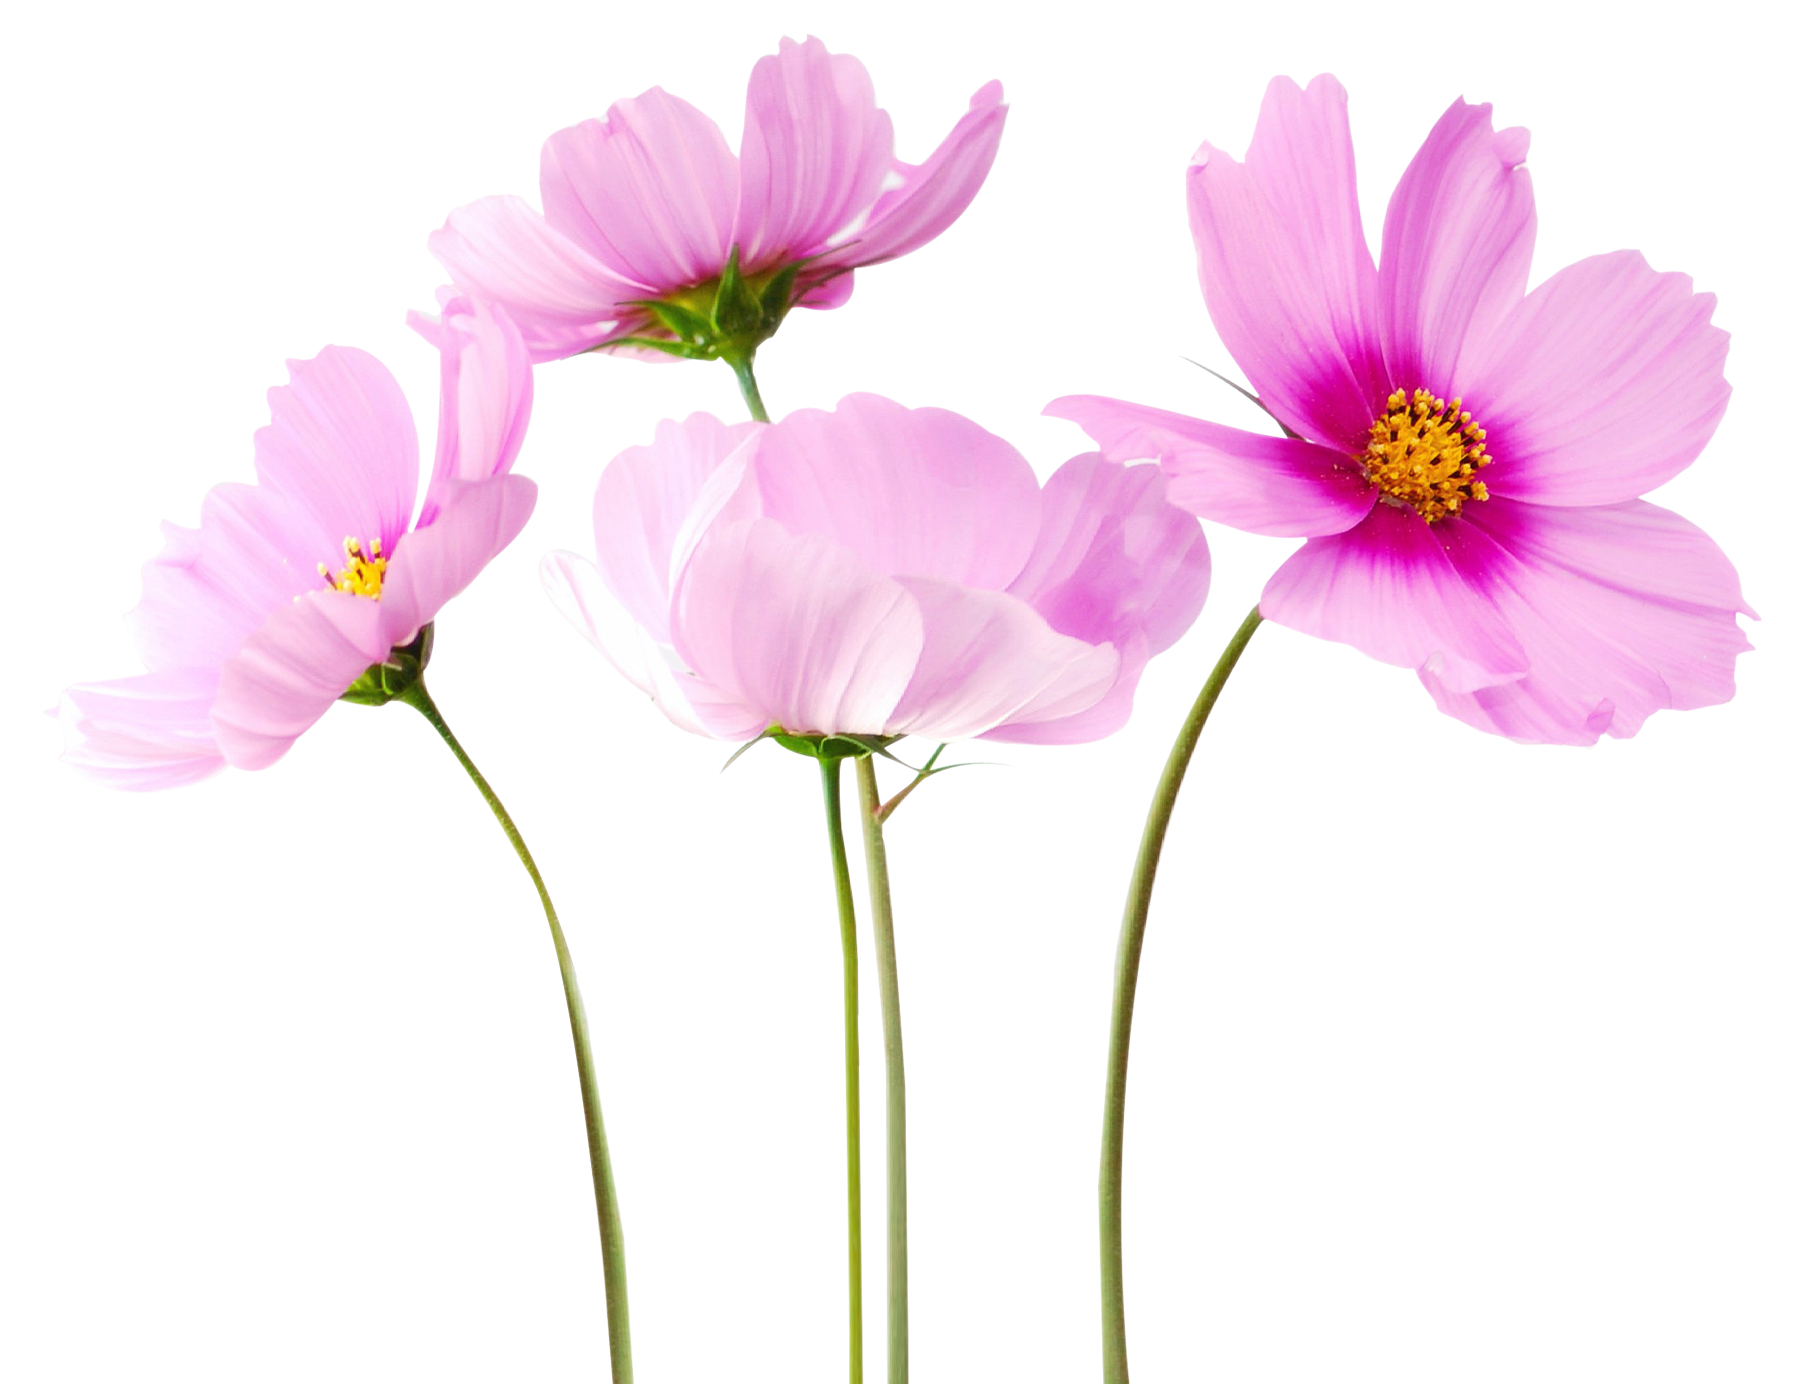 cosmea flower image png #8175